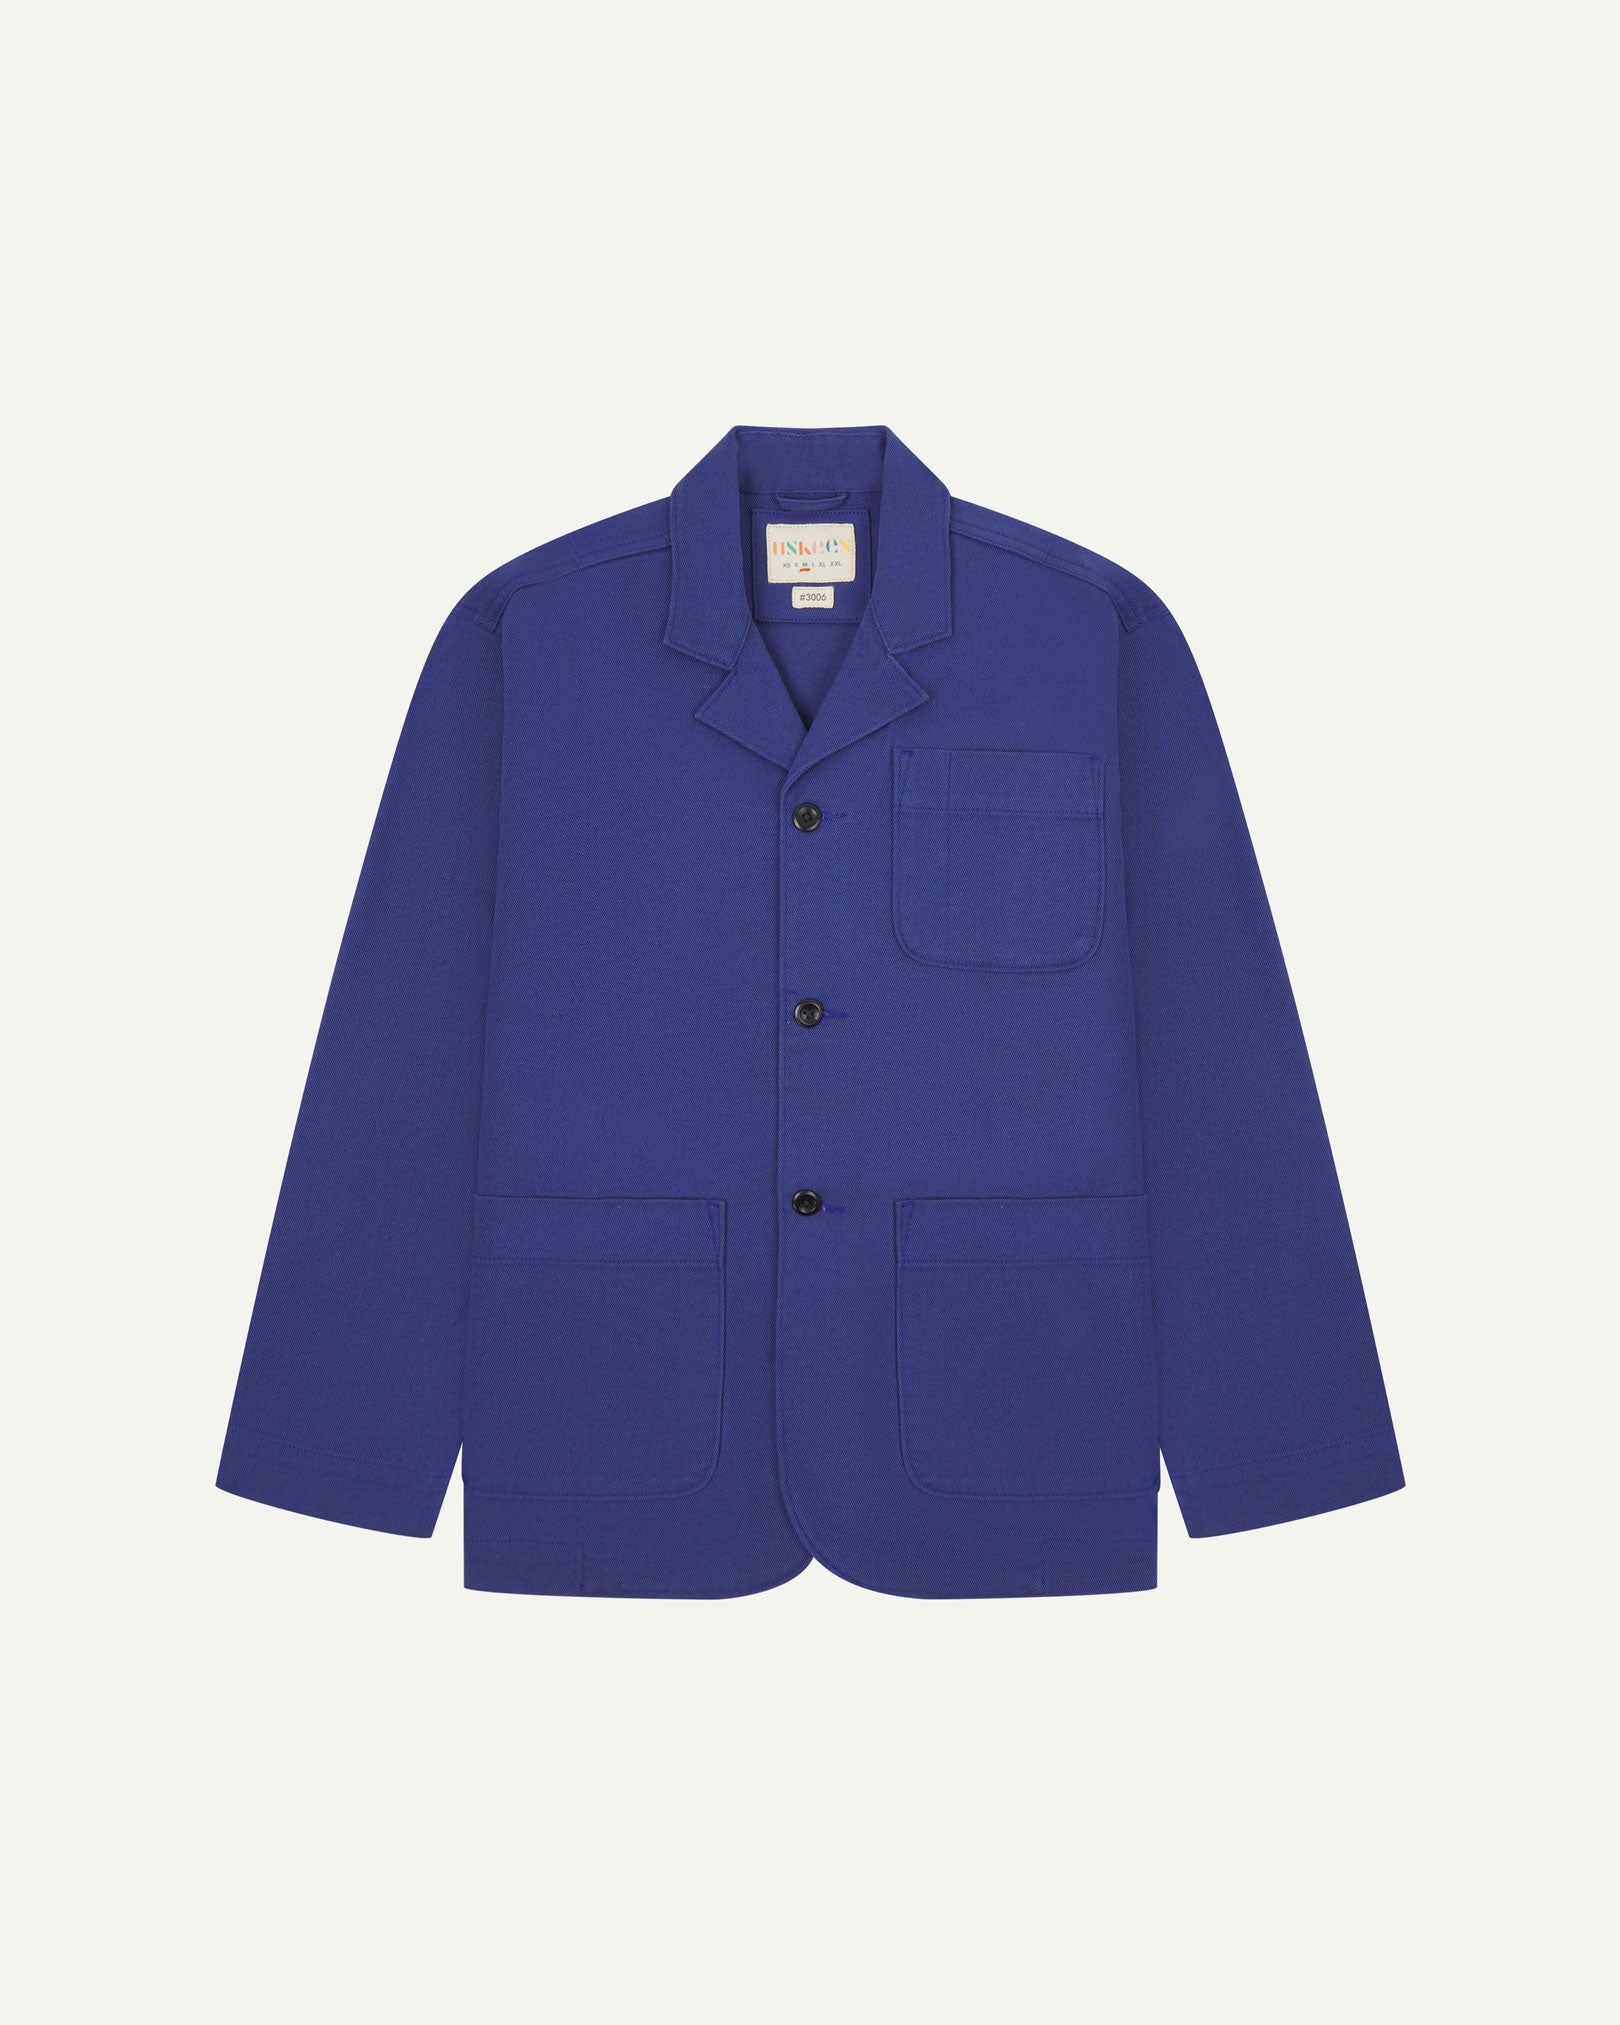 Ultra blue buttoned organic cotton-drill blazer from Uskees with clear view of three patch pockets and Uskees branding label.